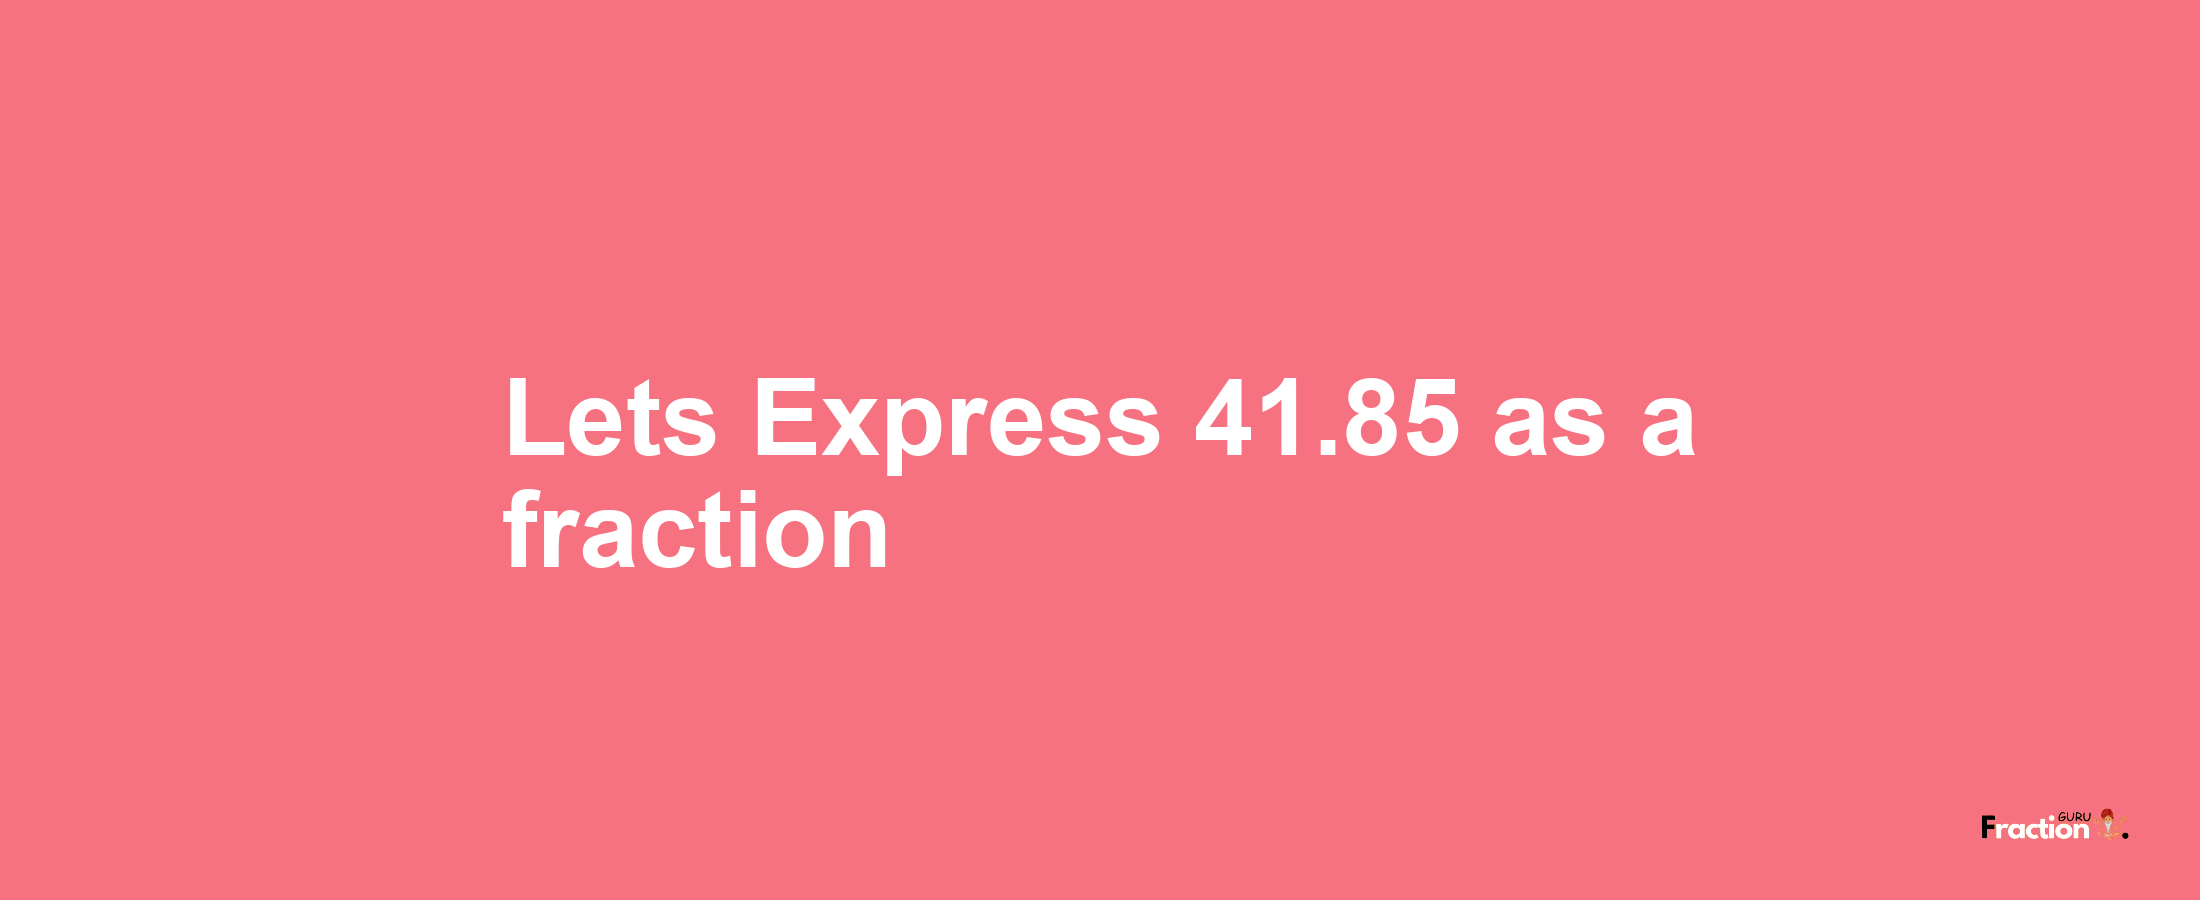 Lets Express 41.85 as afraction